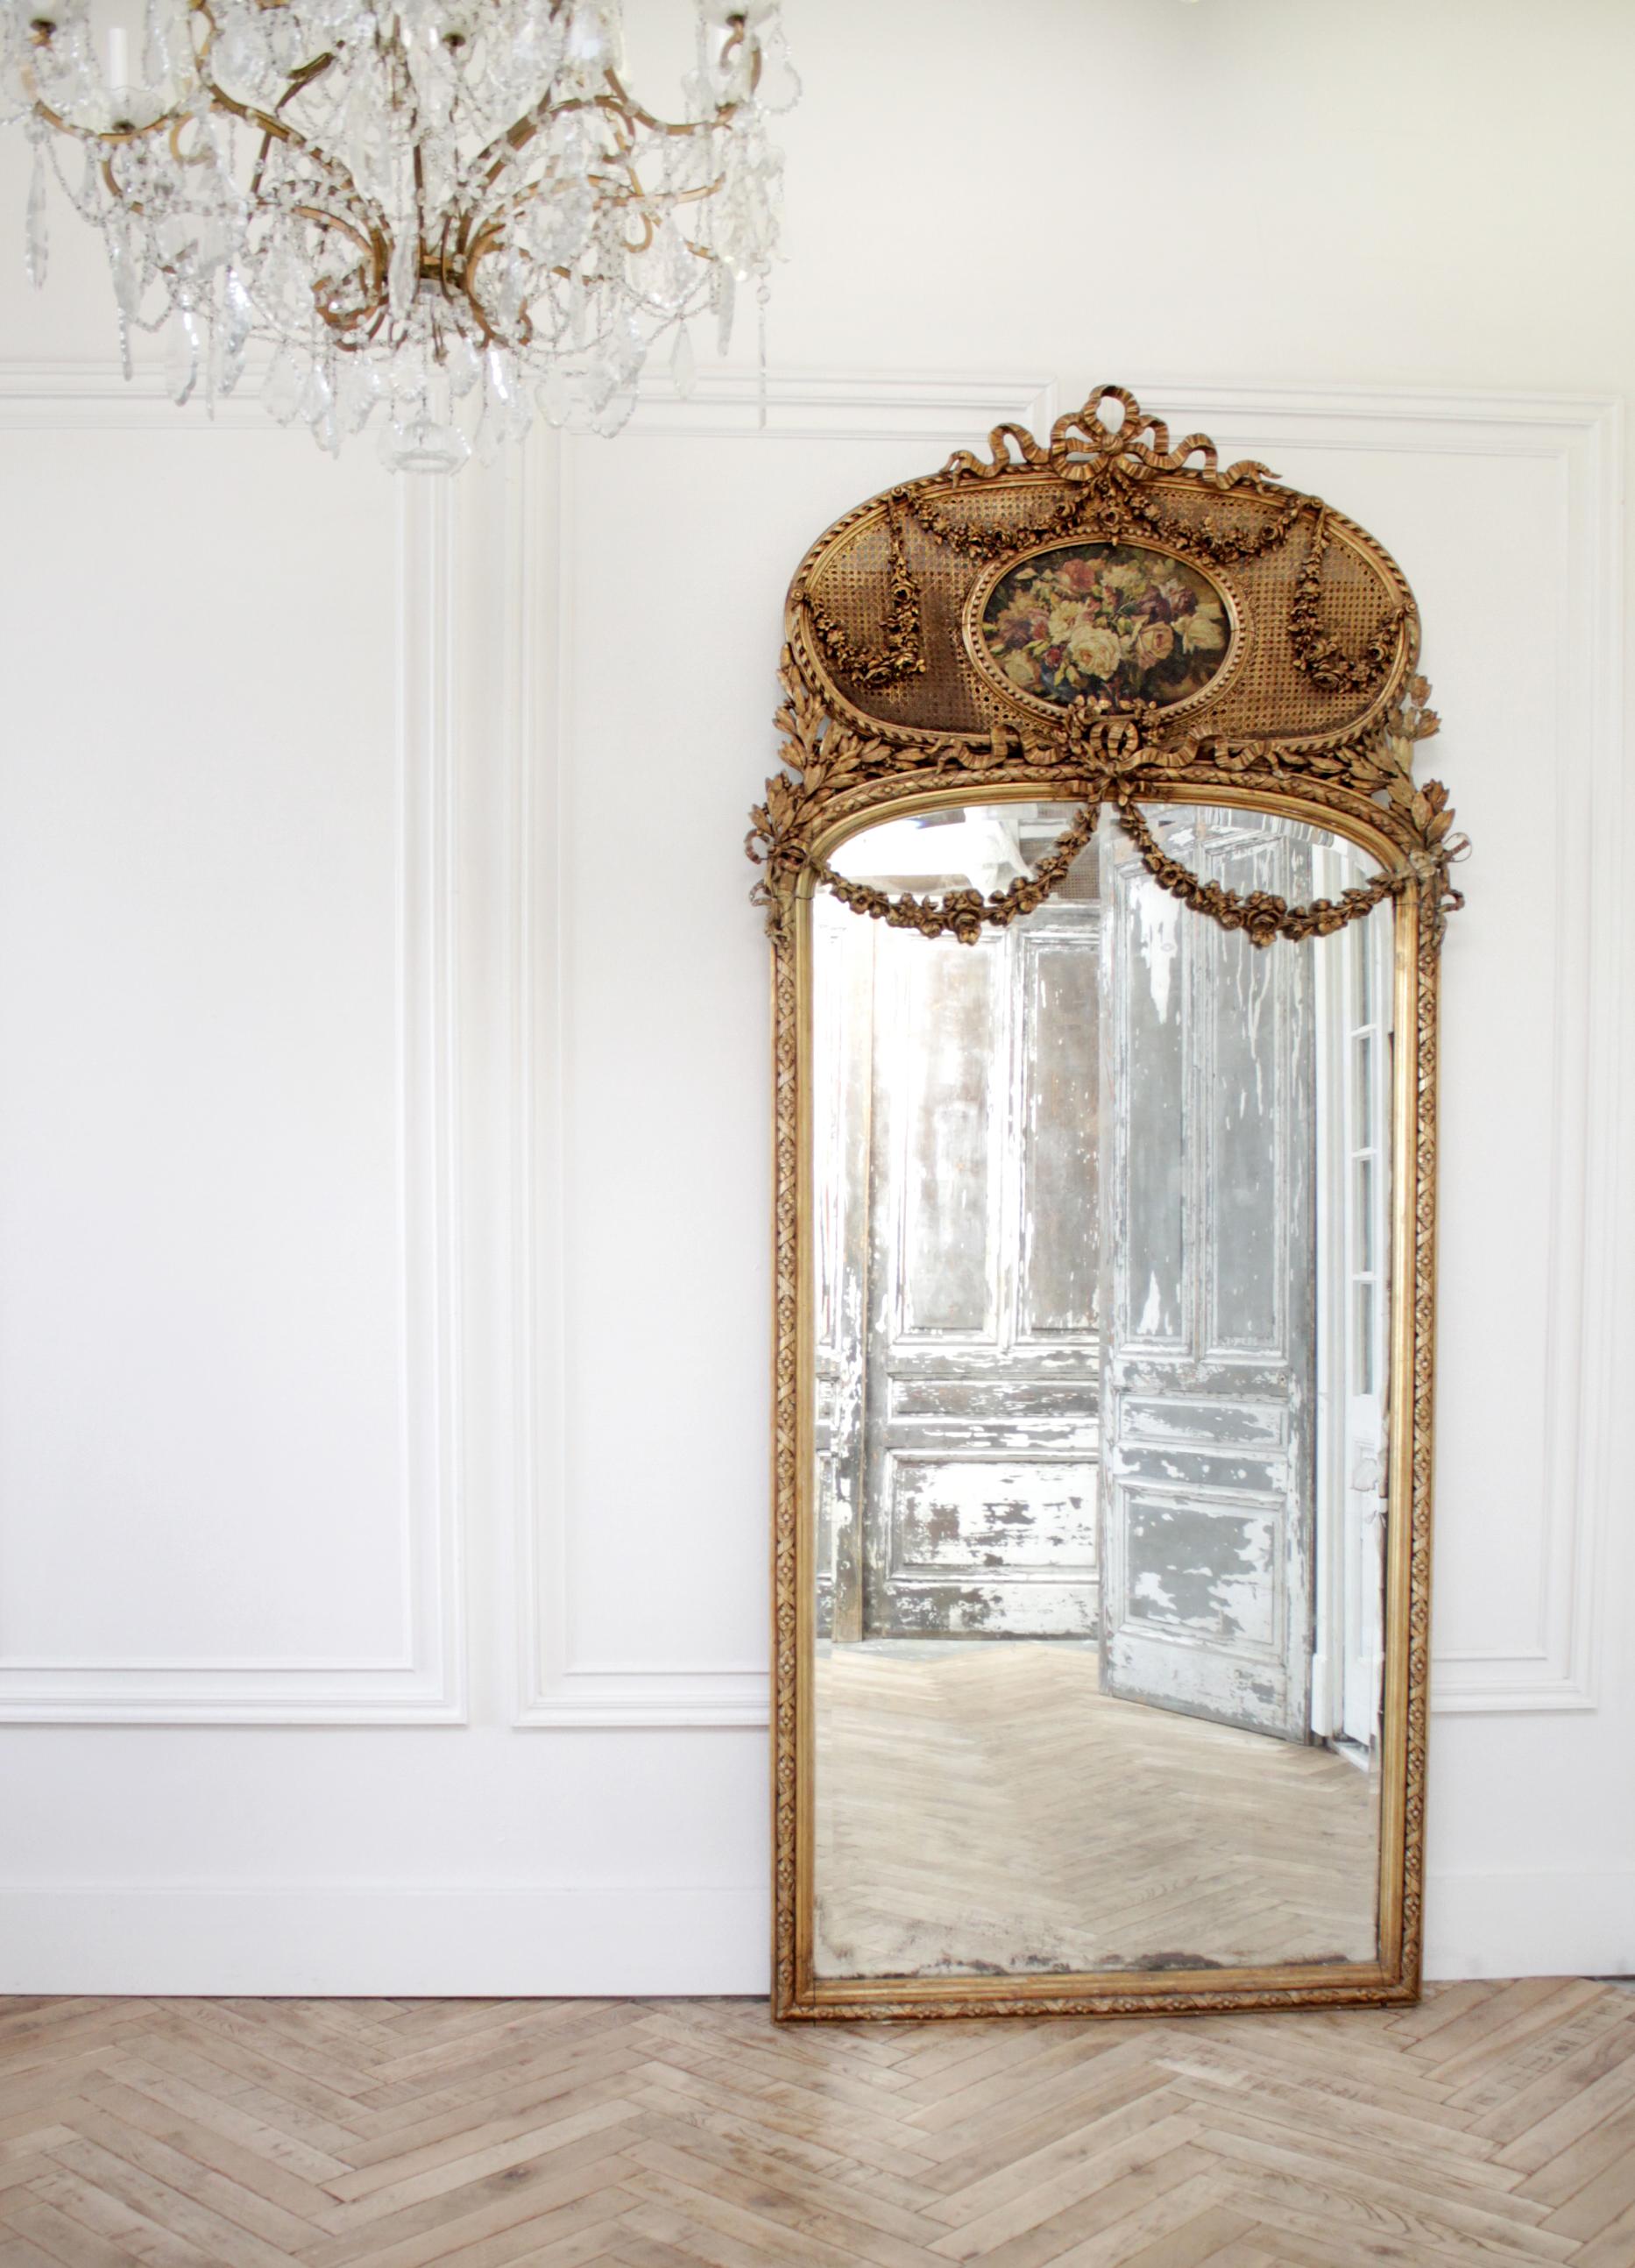 Early 20th century giltwood carved roses and cane trumeau mirror.
This beautiful tall trumeau has a hand painted roses on board, surrounded by large carved rose swags, and ribbons. Cane is in good condition. The mirror is original and shows signs